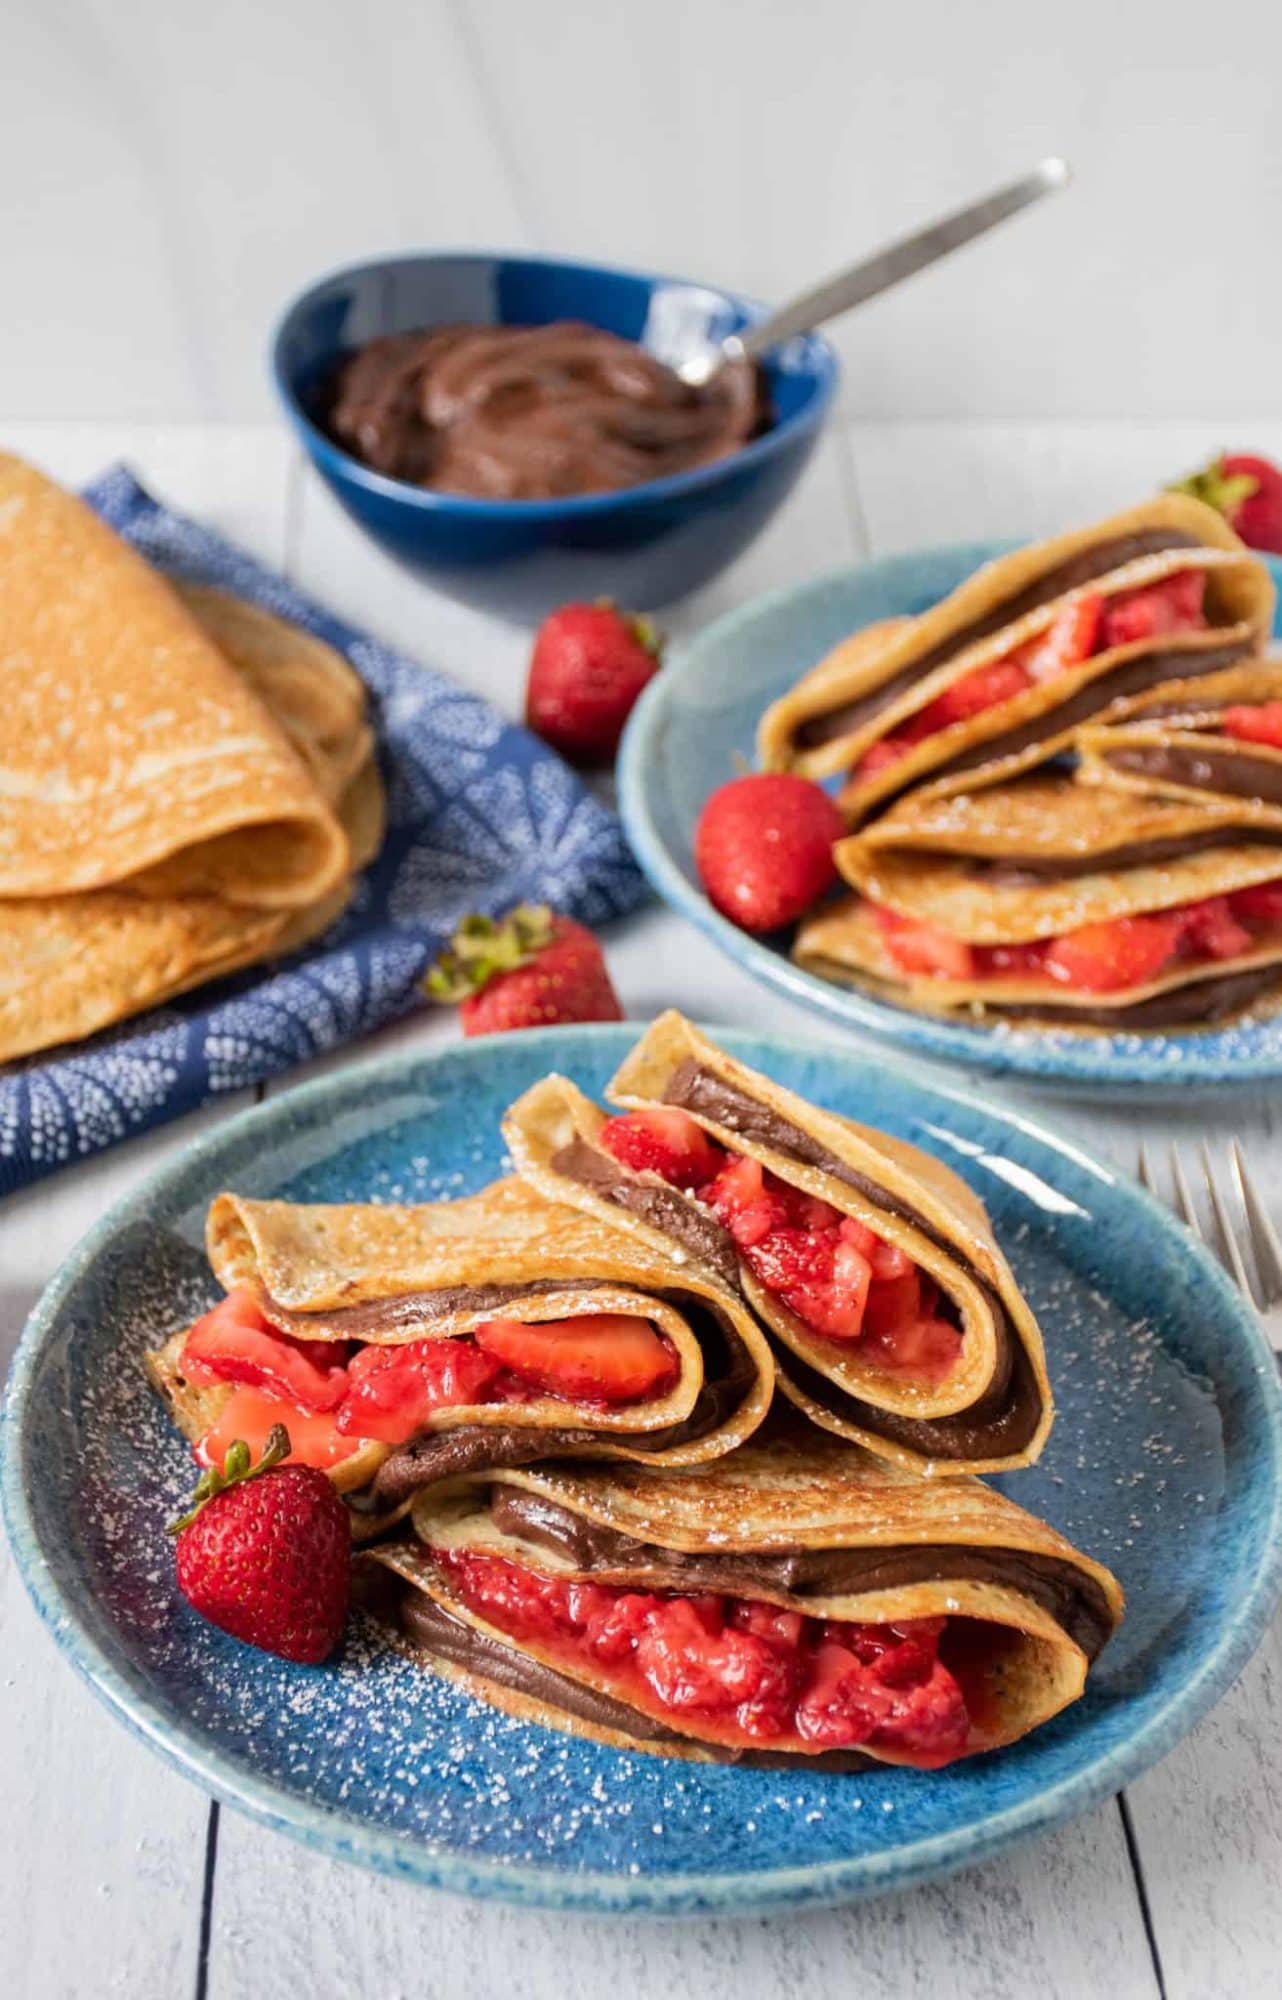 Plates of healthy crepes filled with brownie batter and sliced strawberries